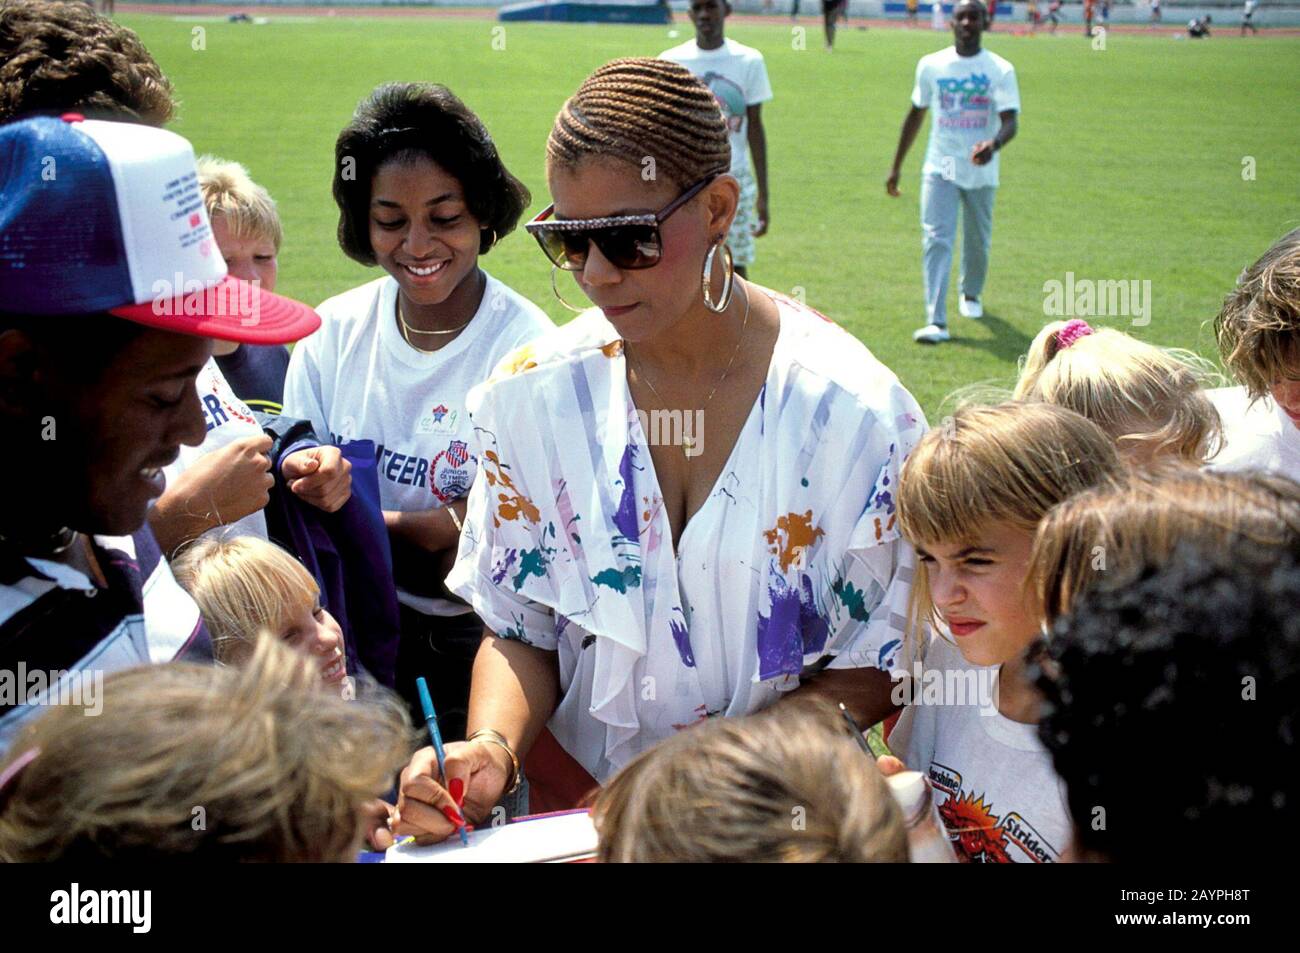 Austin Texas USA: Retired track star Wilma Rudolph signing autographs at youth track event.  She won three  gold medal at the1960 Rome Olympics (100m, 200m, 4x100m relays).  ©Bob Daemmrich Stock Photo